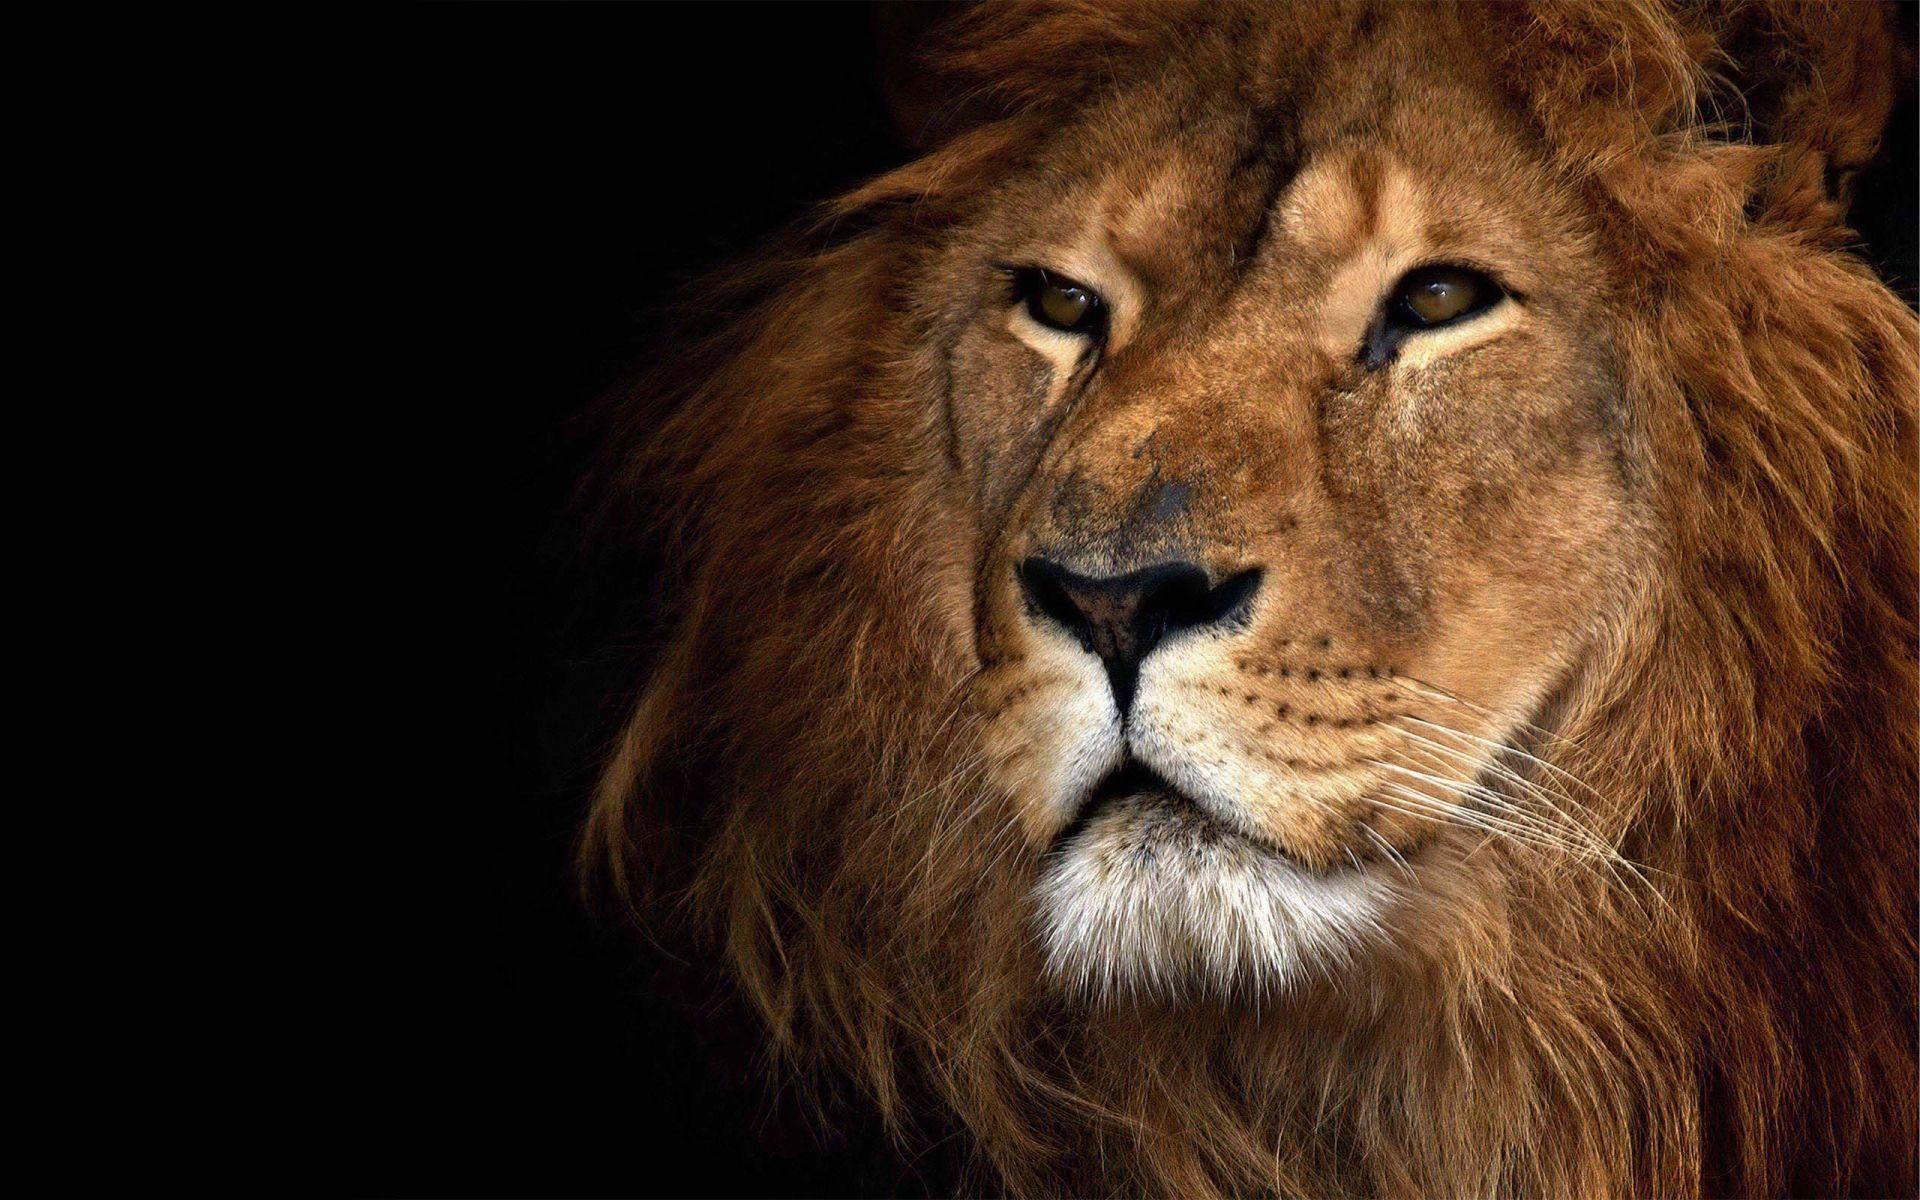 Lion Face Wallpaper. HD Animals and Birds Wallpaper for Mobile